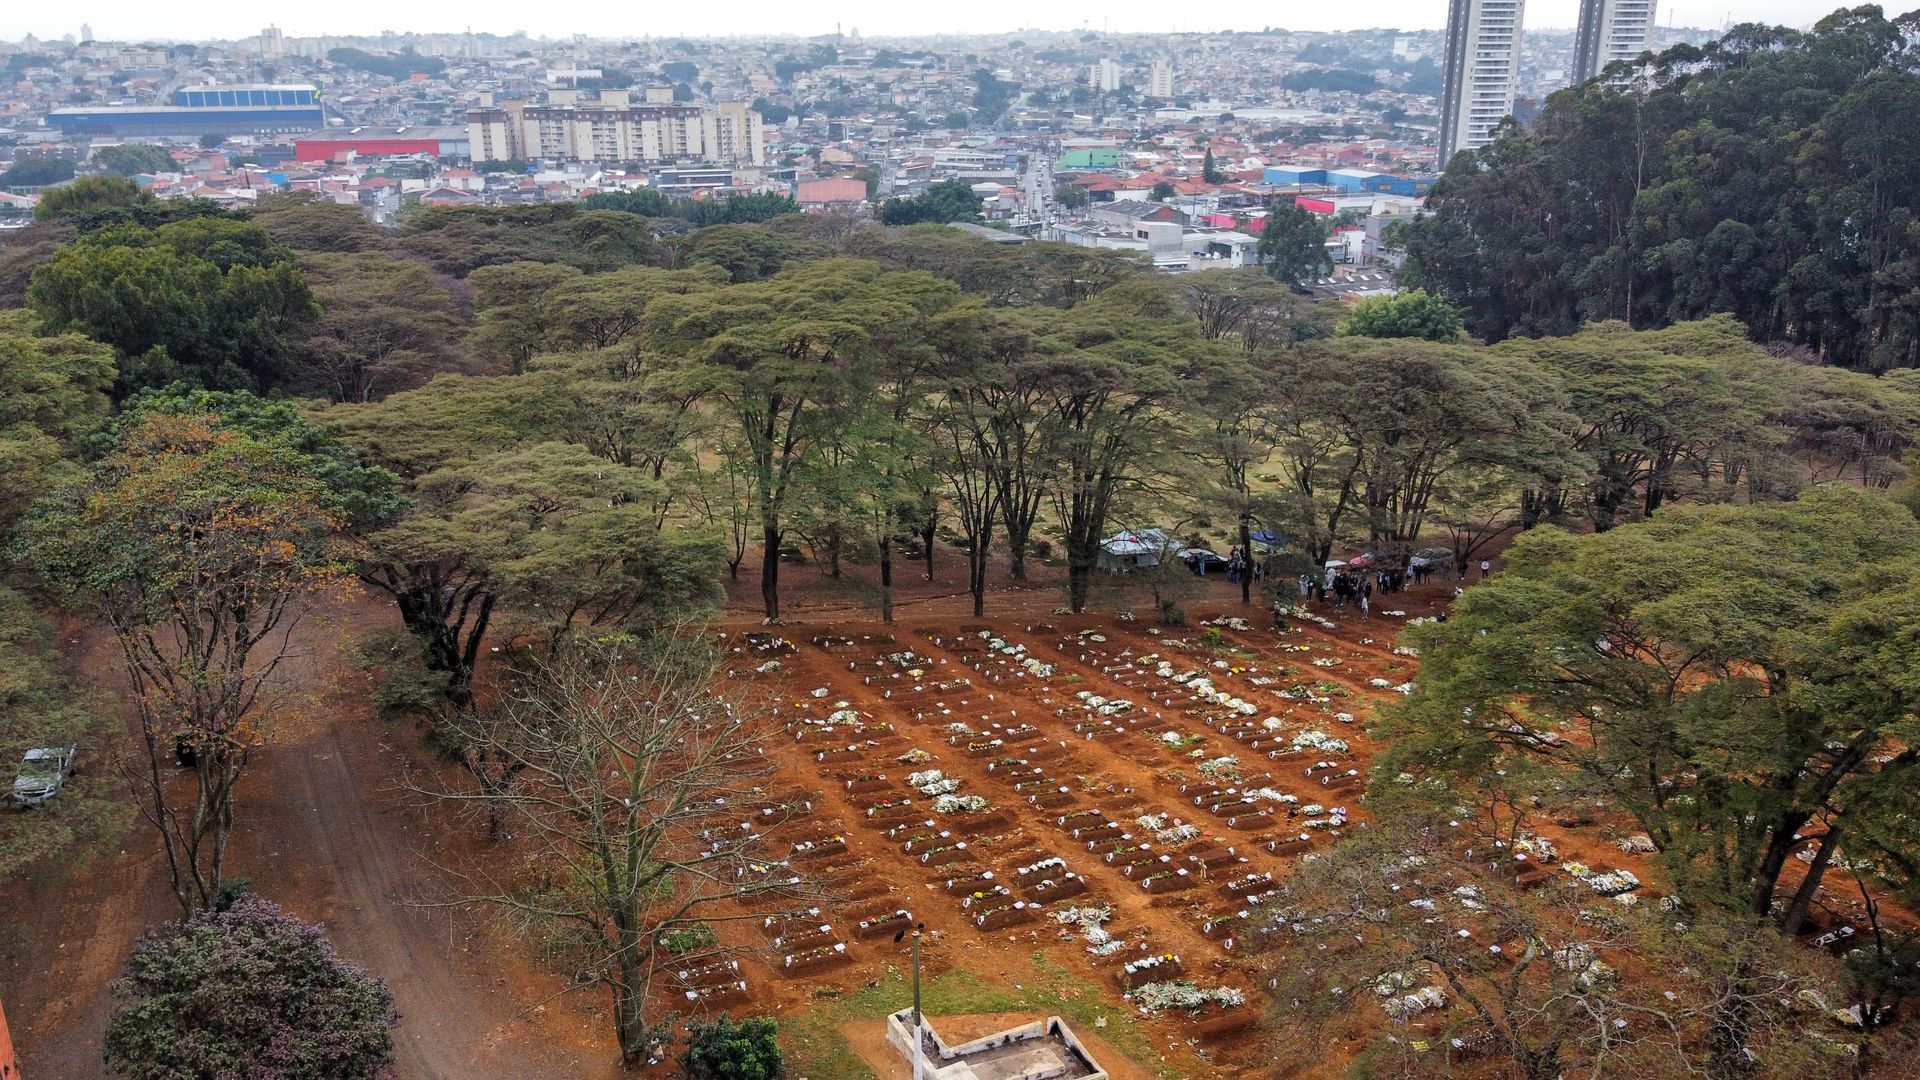 The graves of recently buried COVID victims in Sao Paolo, Brazil.